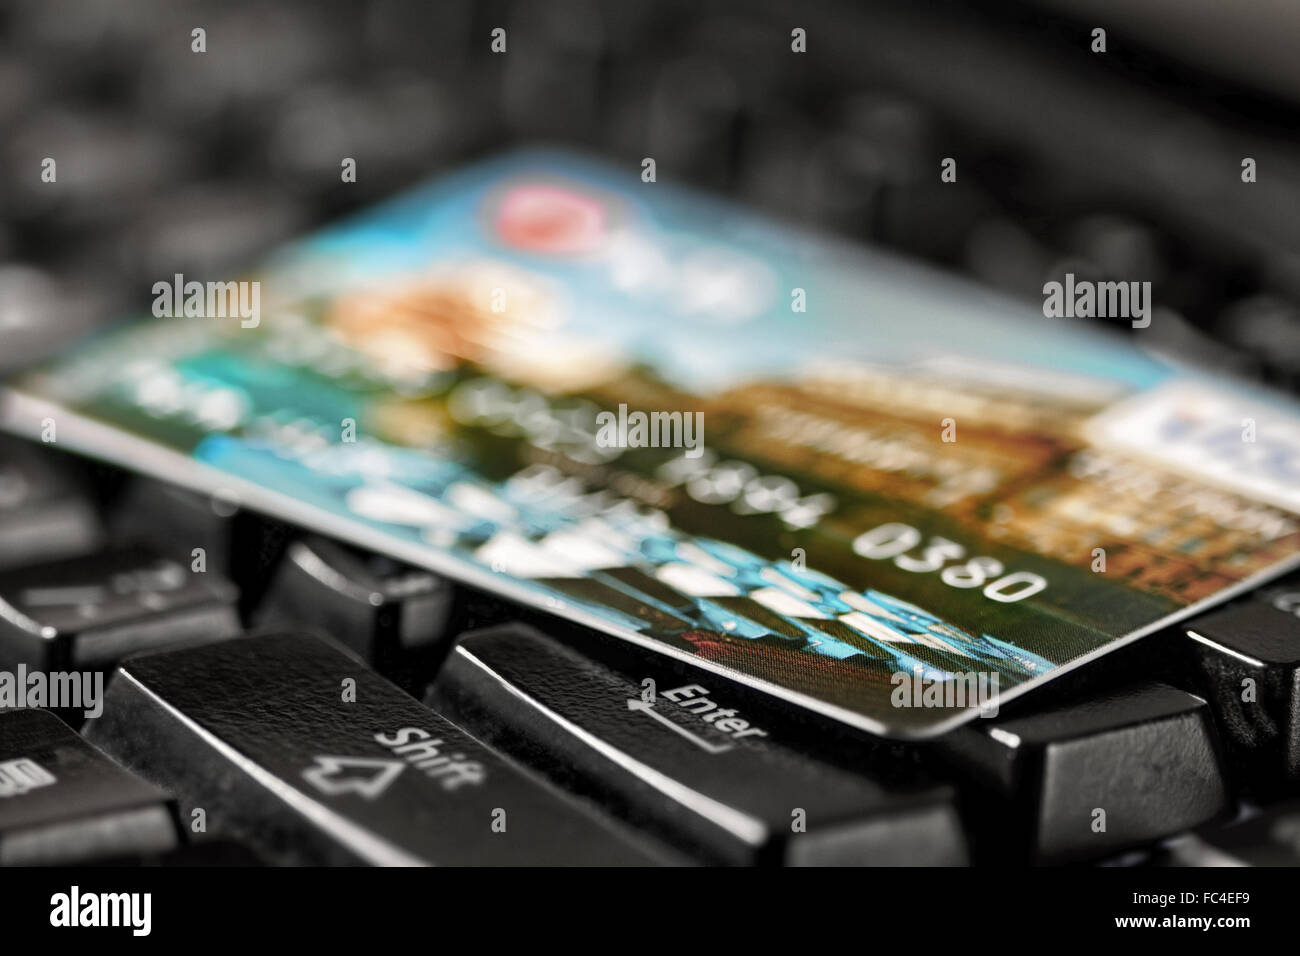 Close- up view on payment card na keyboard Stock Photo